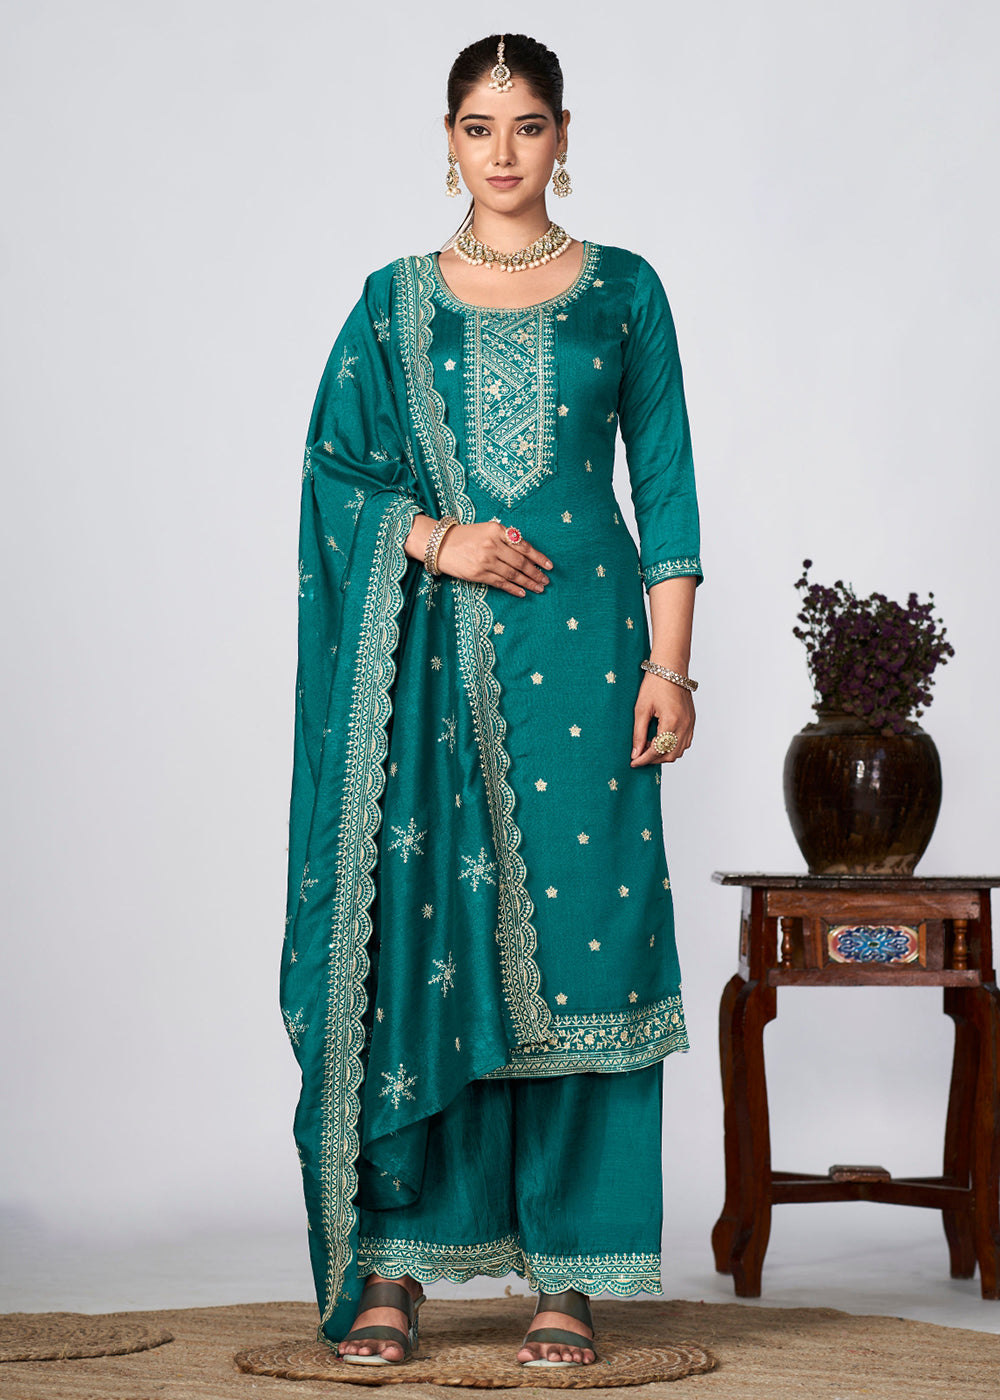 Buy Now Rama Vichitra Silk Embroidered Wedding Festive Palazzo Suit Online in USA, UK, Canada, Germany, Australia & Worldwide at Empress Clothing.